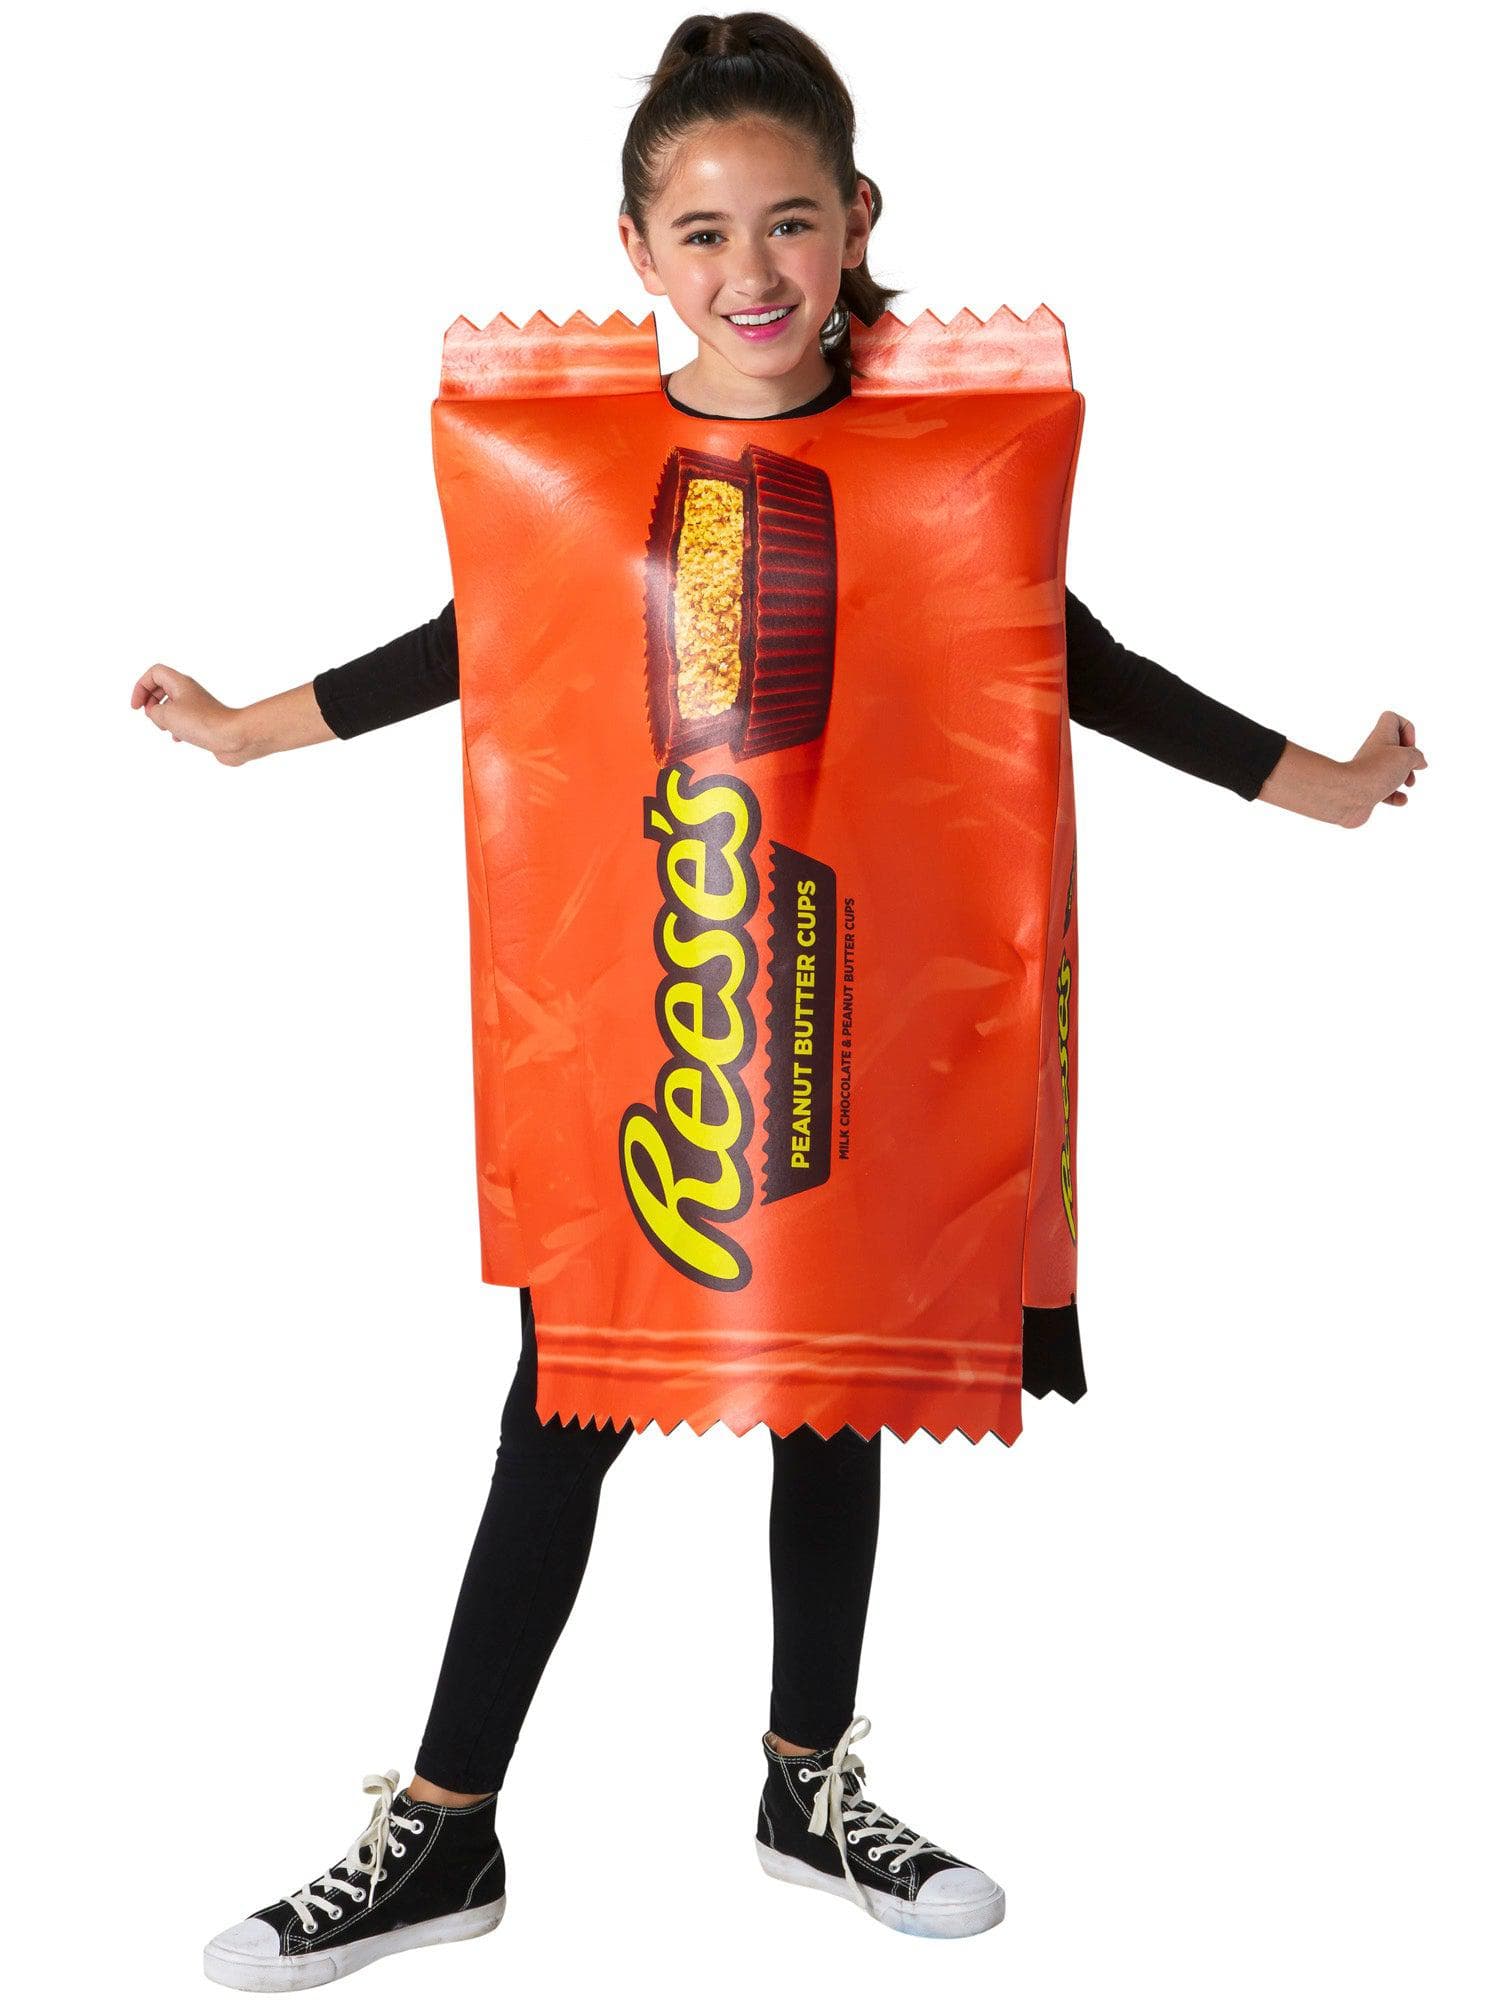 Reese's Peanut Butter Cup Kids Costume - costumes.com